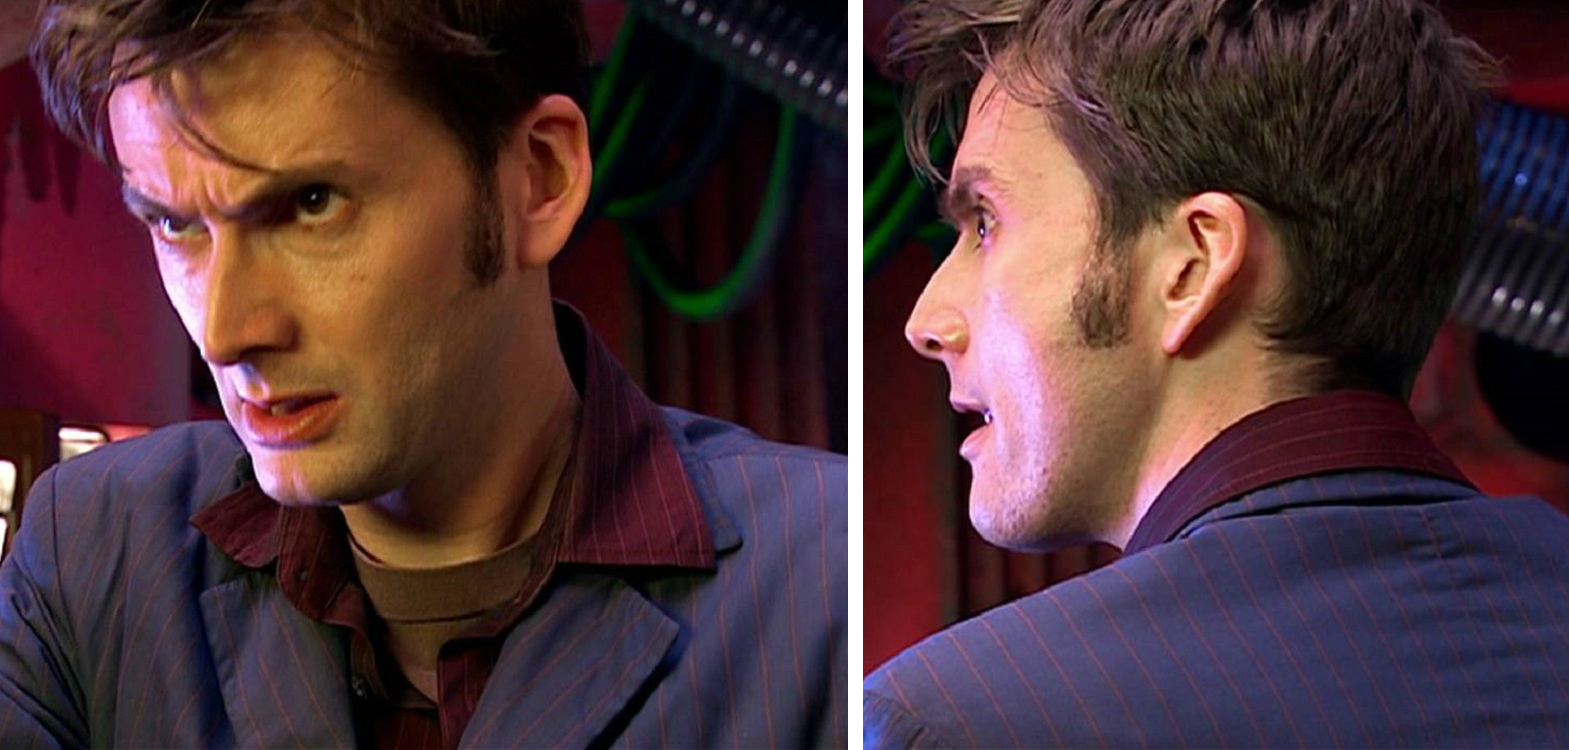 10th Doctor blue suit shirt layers